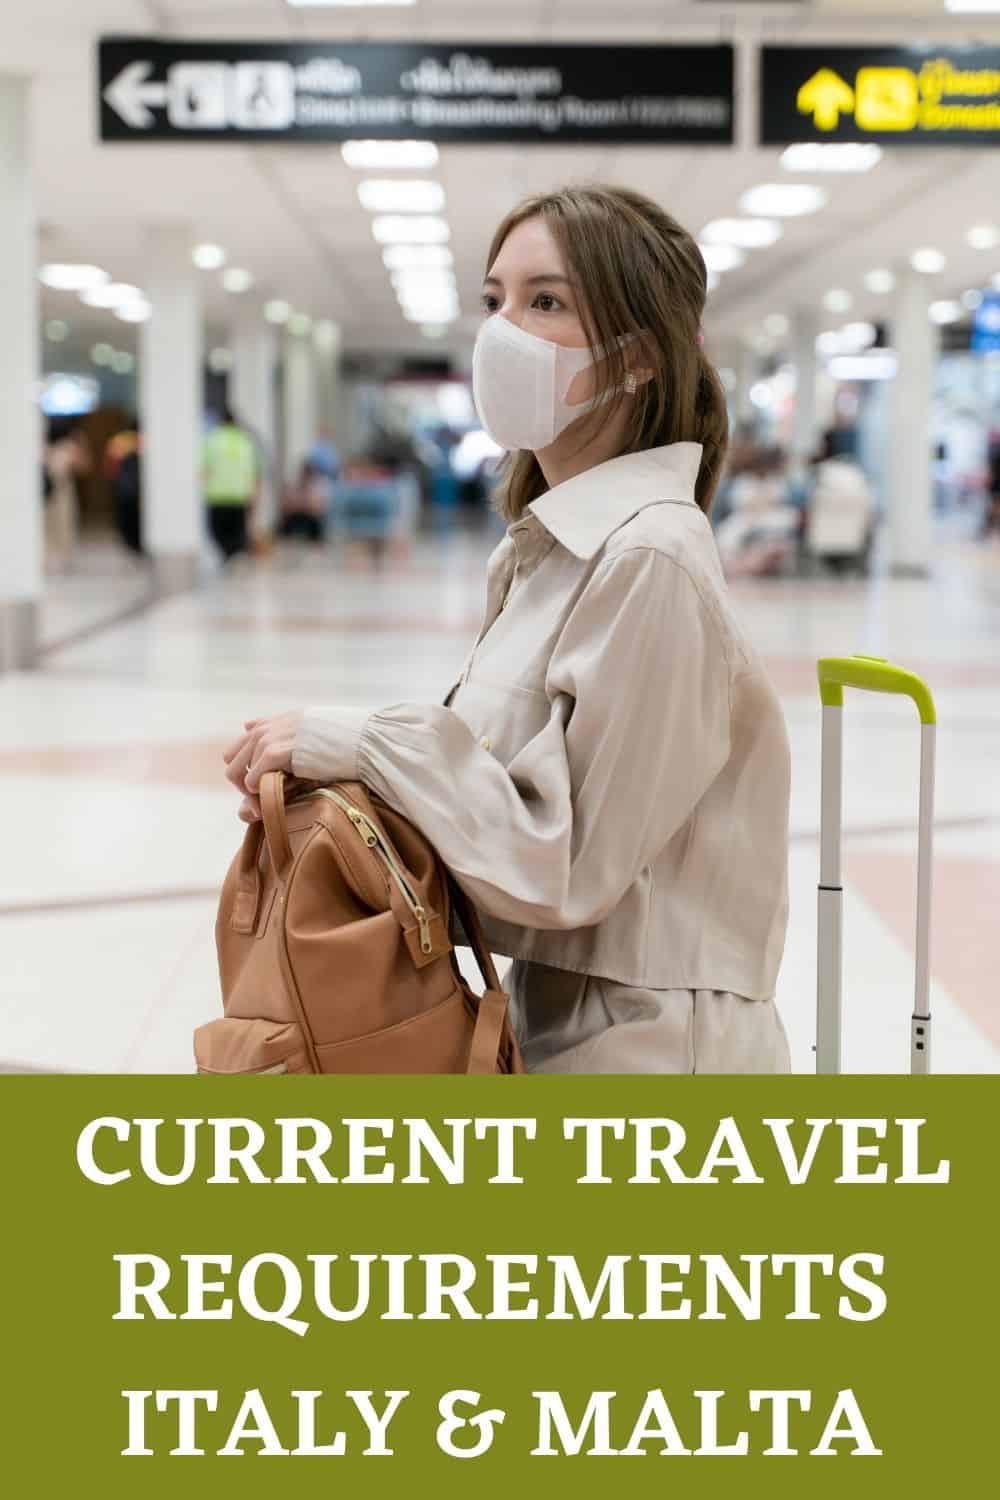 Travel is resuming but it requires extra preparation. Learn about the current Malta and Italy travel requirements from first-hand experience. #Europetravel #europetravelrestrictions #travelrestrictionsitaly